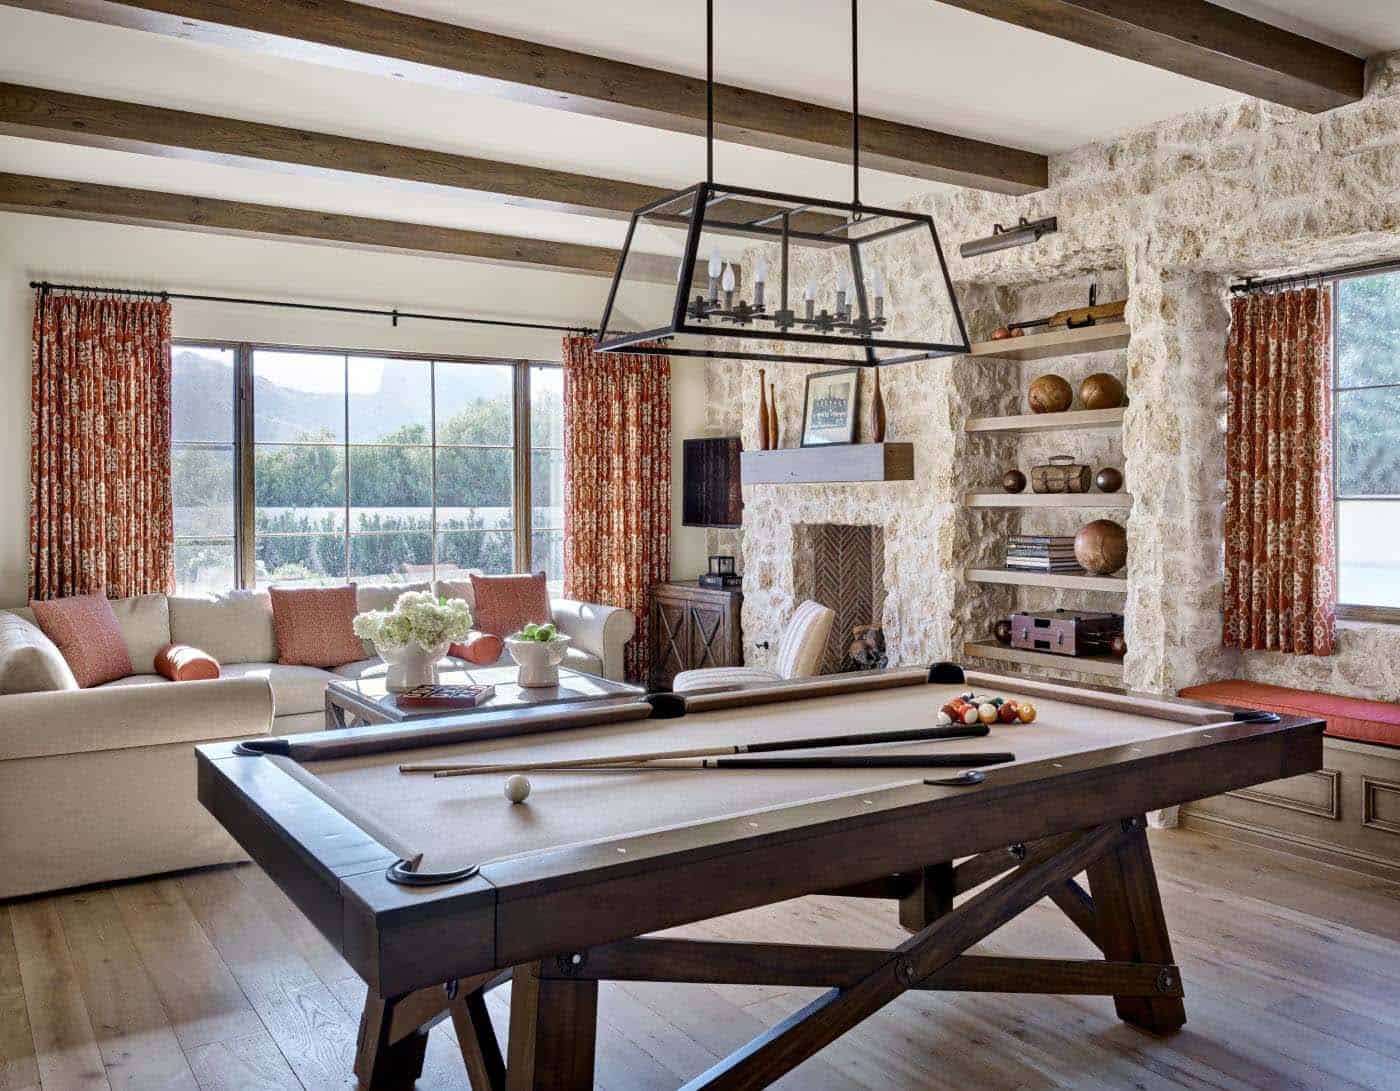 mediterranean style with a pool table and lounge area